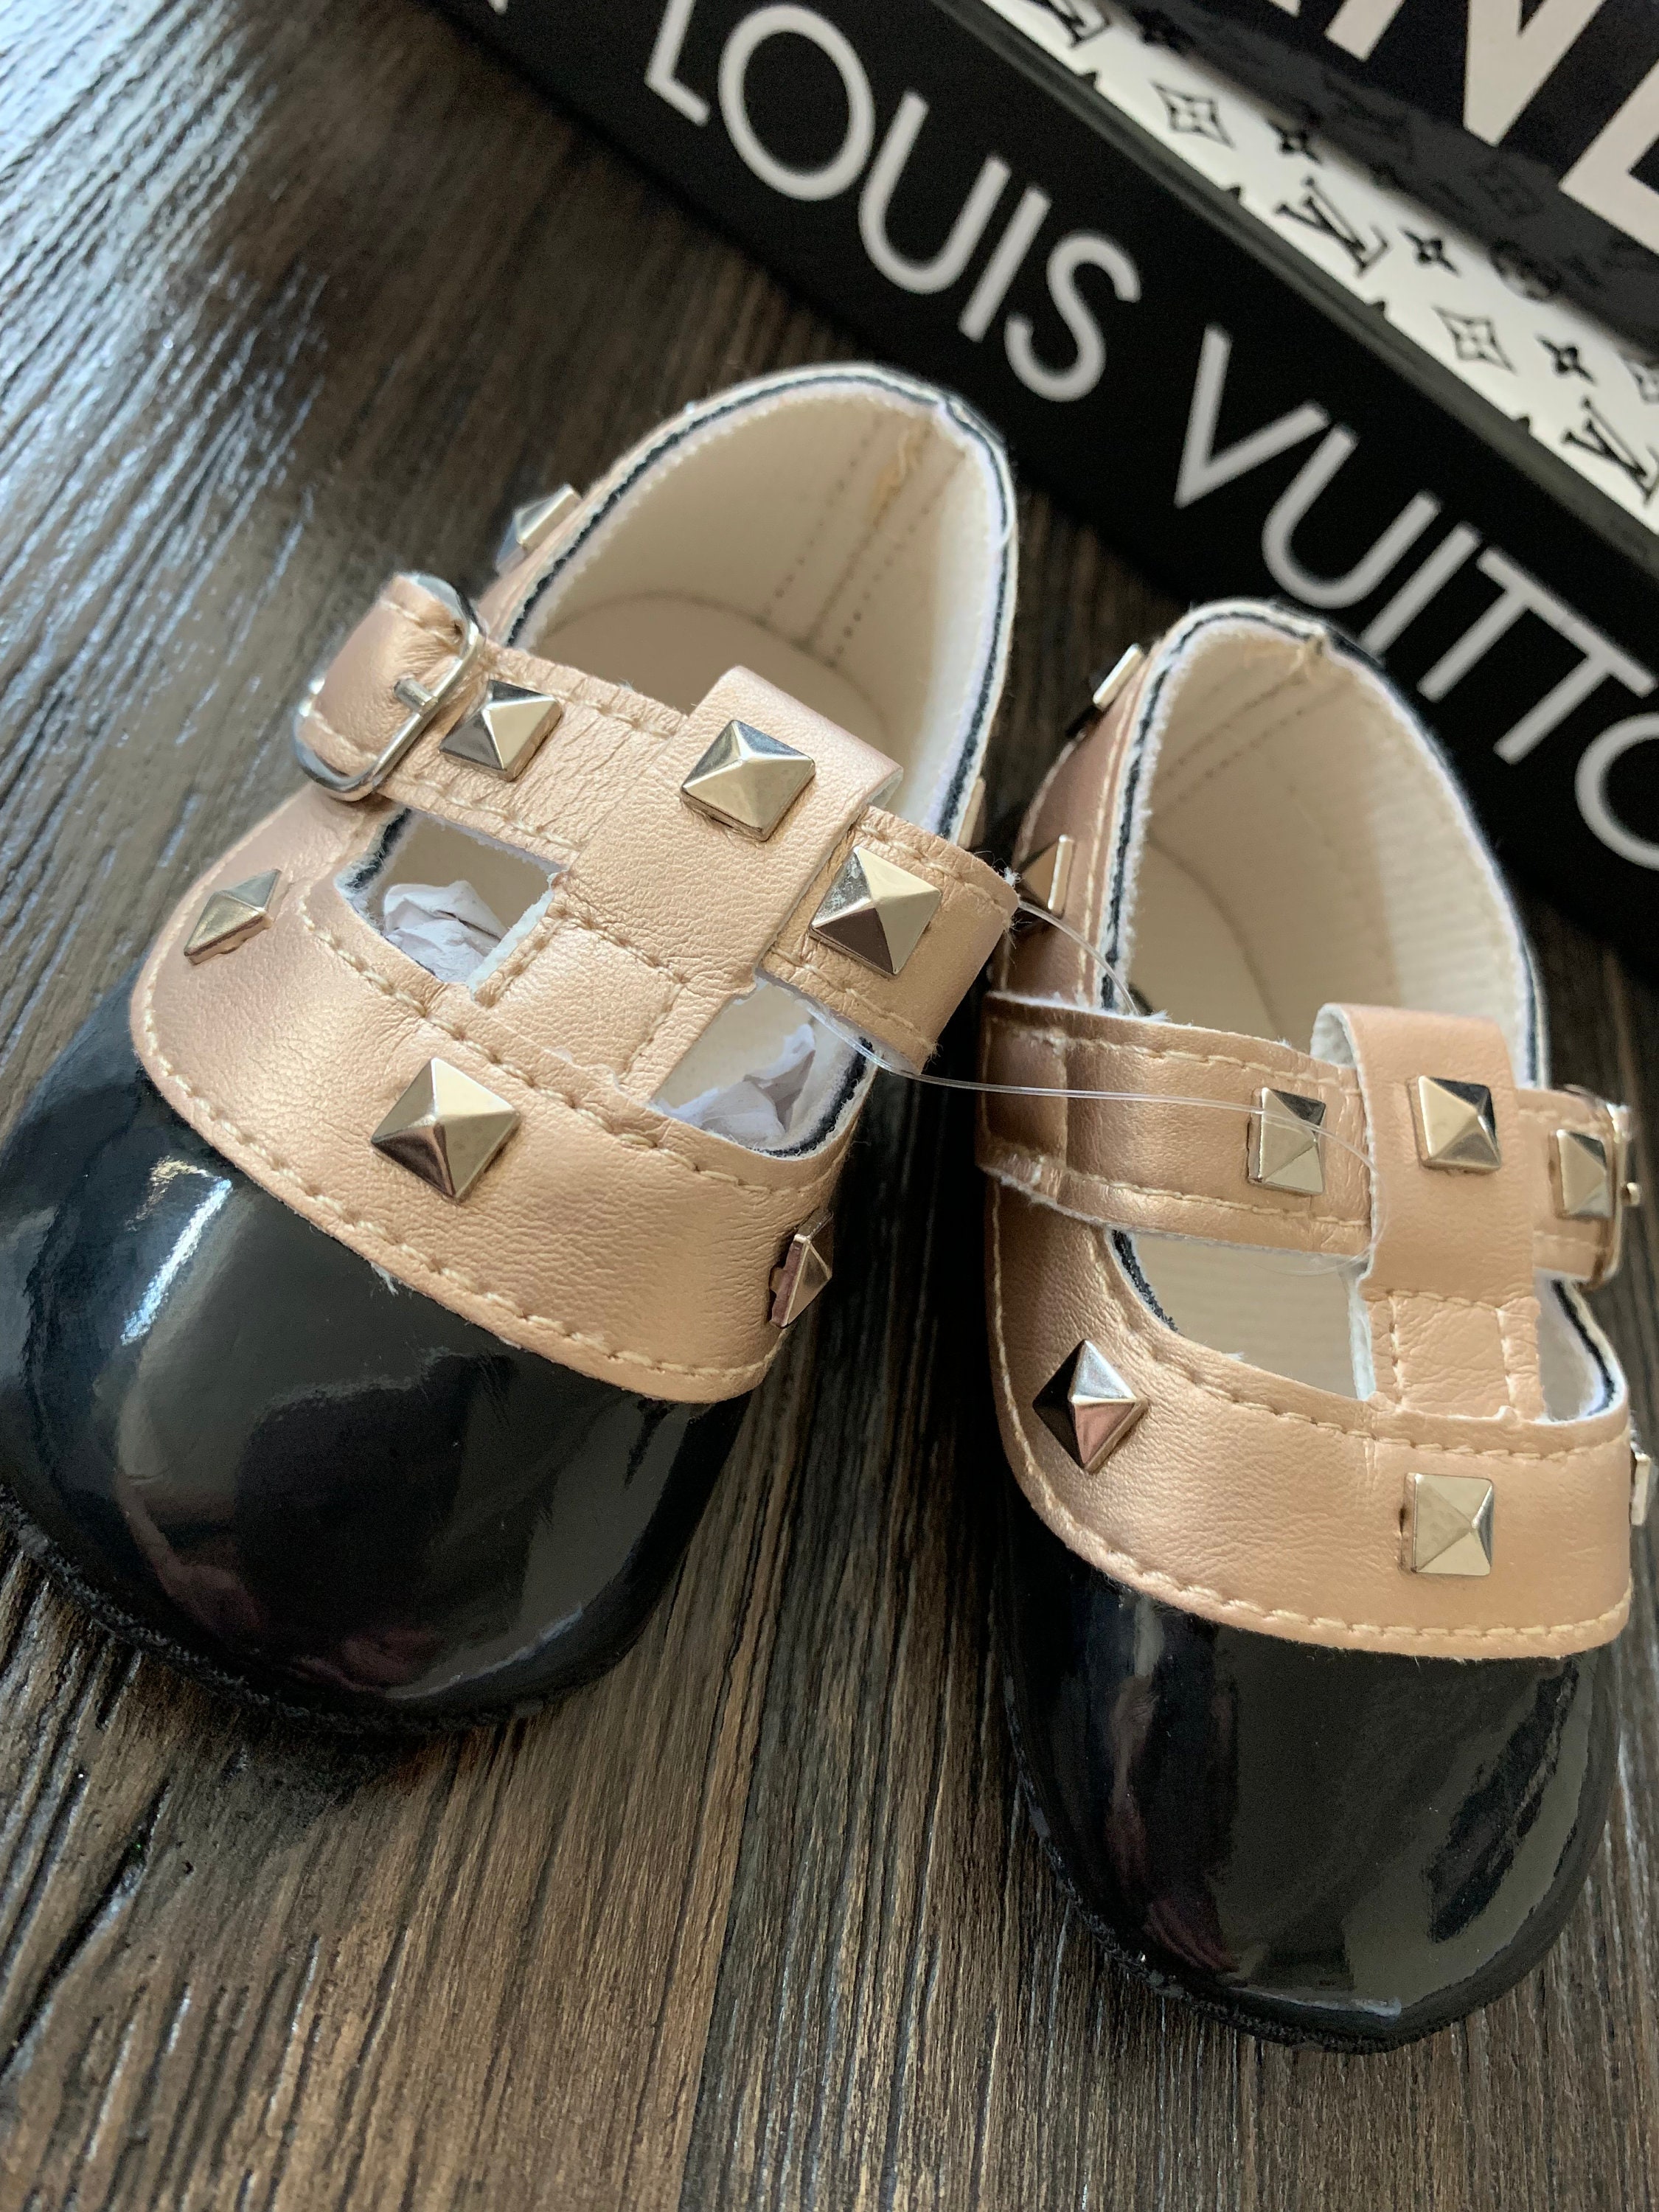 Adorable Baby Girl Shoes Crib Shoes Designer Studied Shoe 